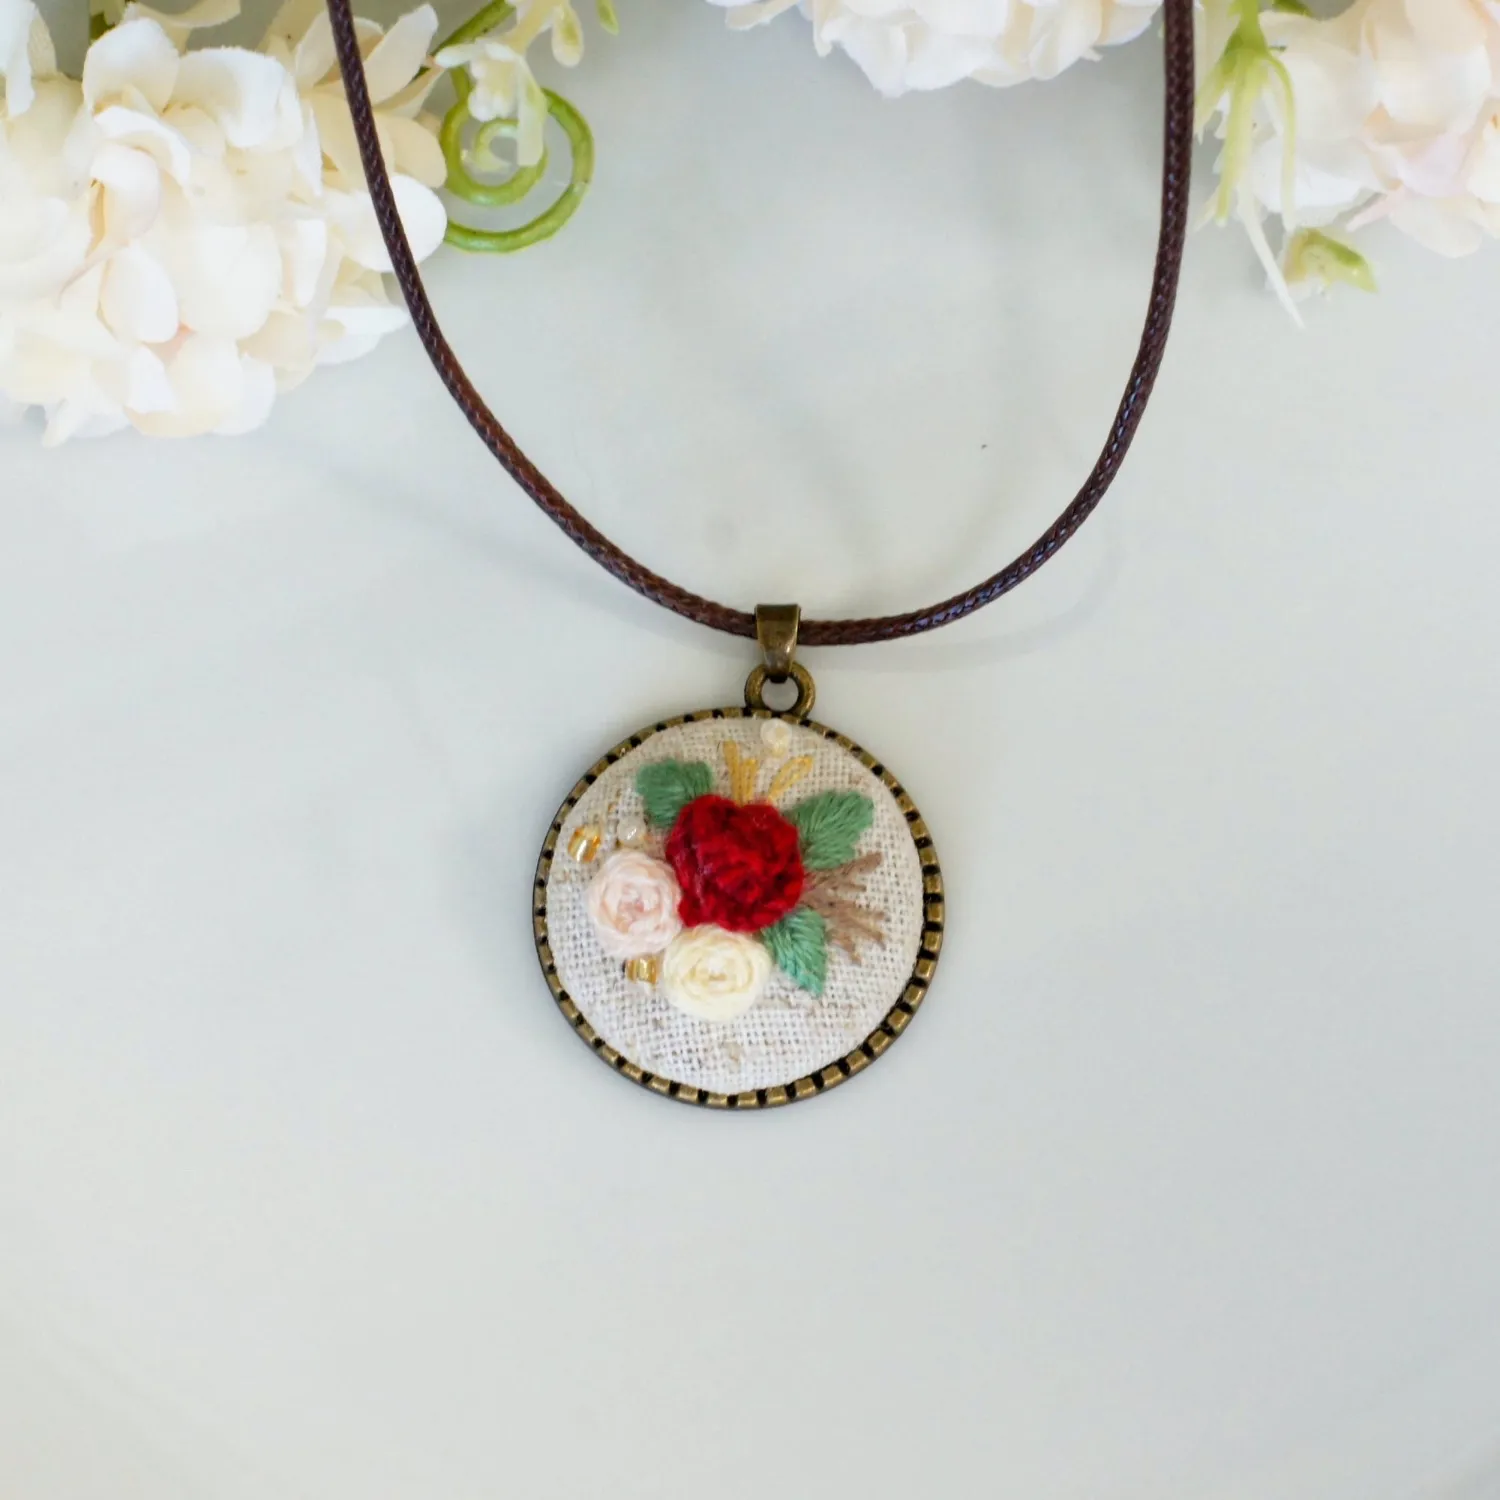 embroidered rose floral pendant